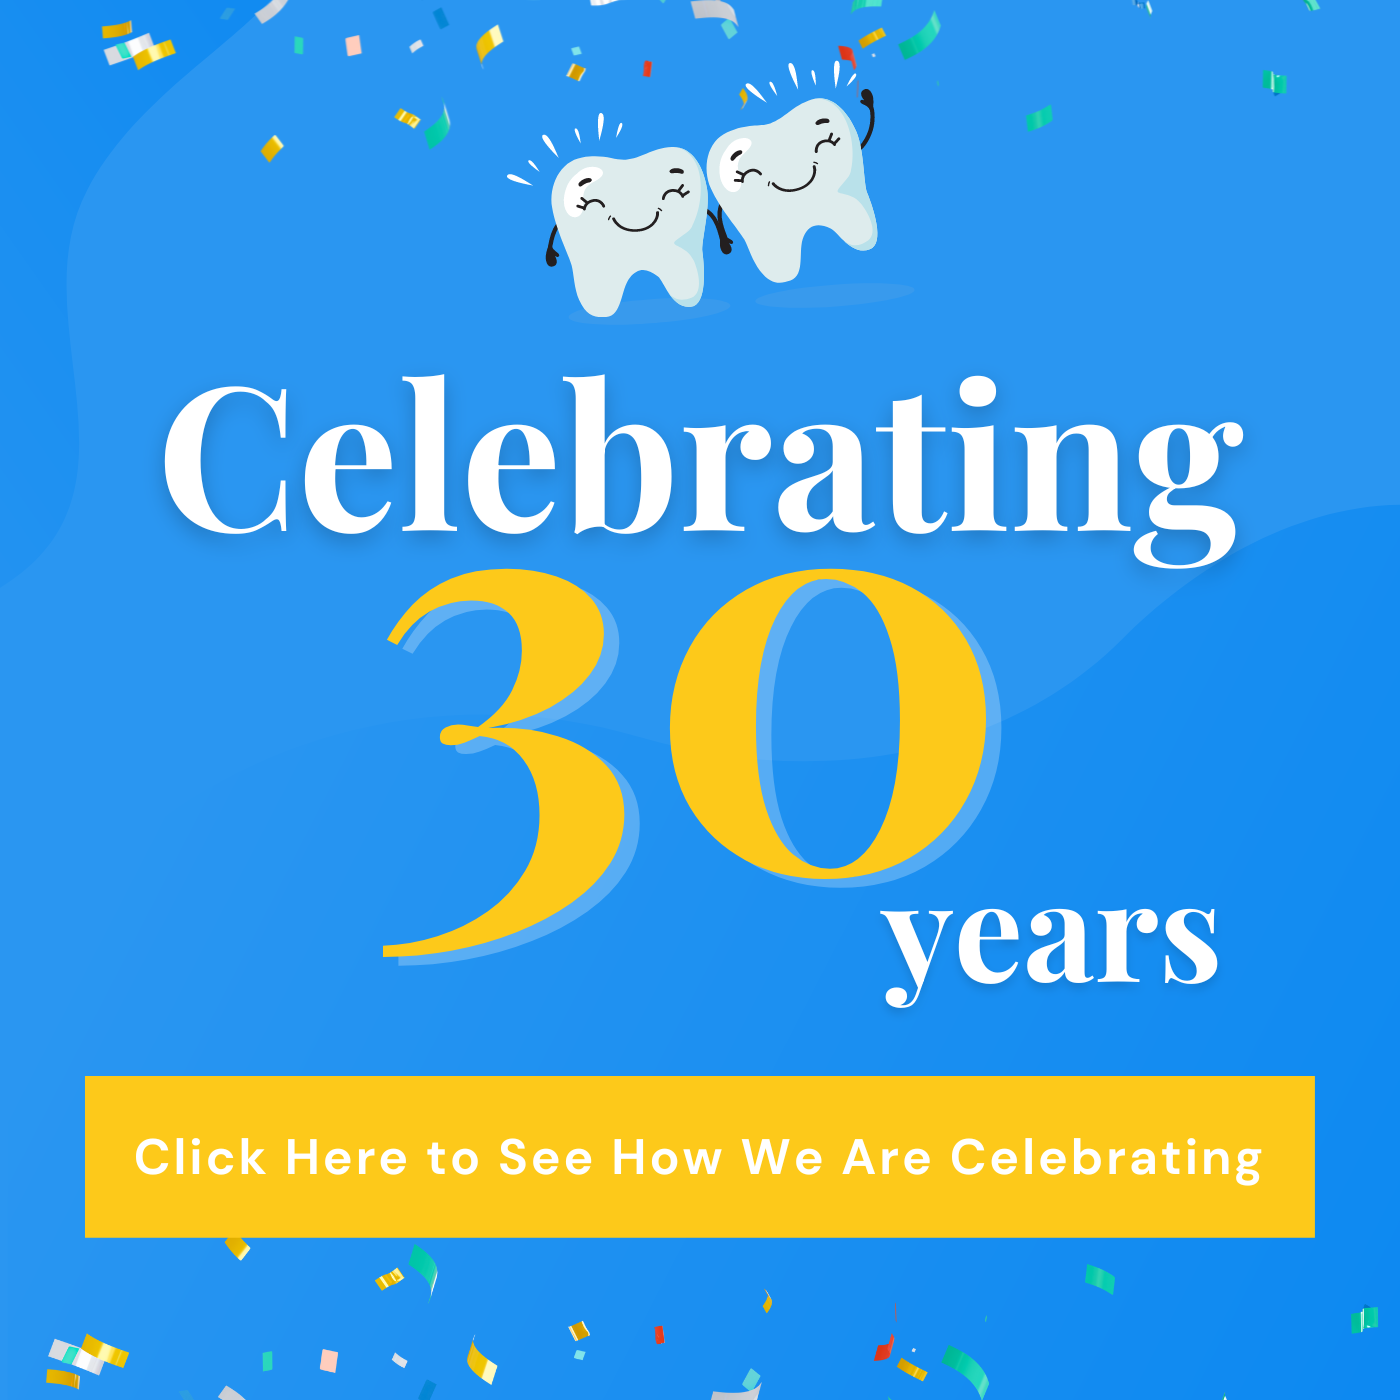 Celebrating 30 years at Lucas Orthodontics in Pembroke Pines and Plantation, FL